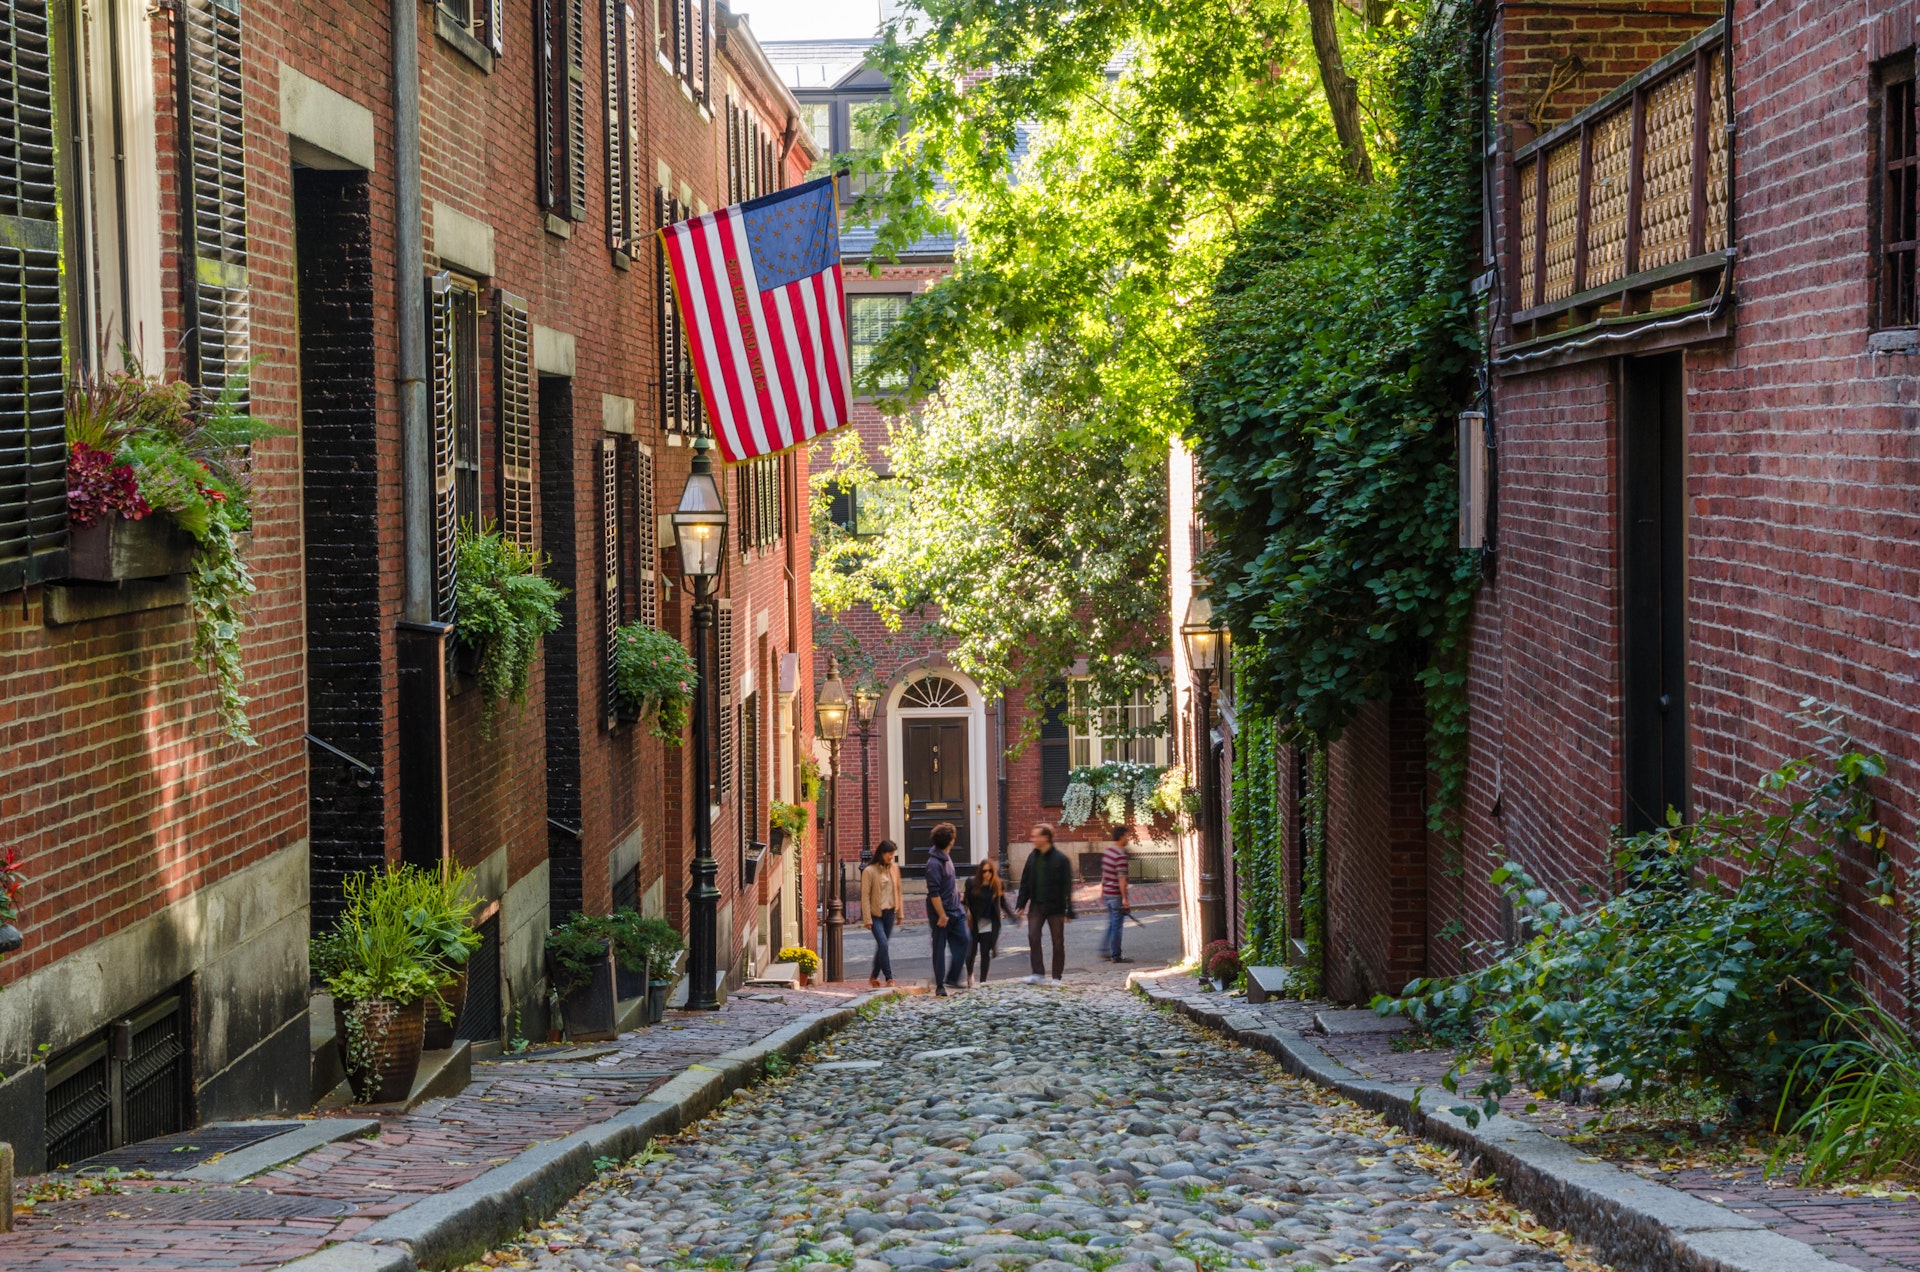 Tourists wandering along Acorn Street in Beacon Hill on a warm autumn day.